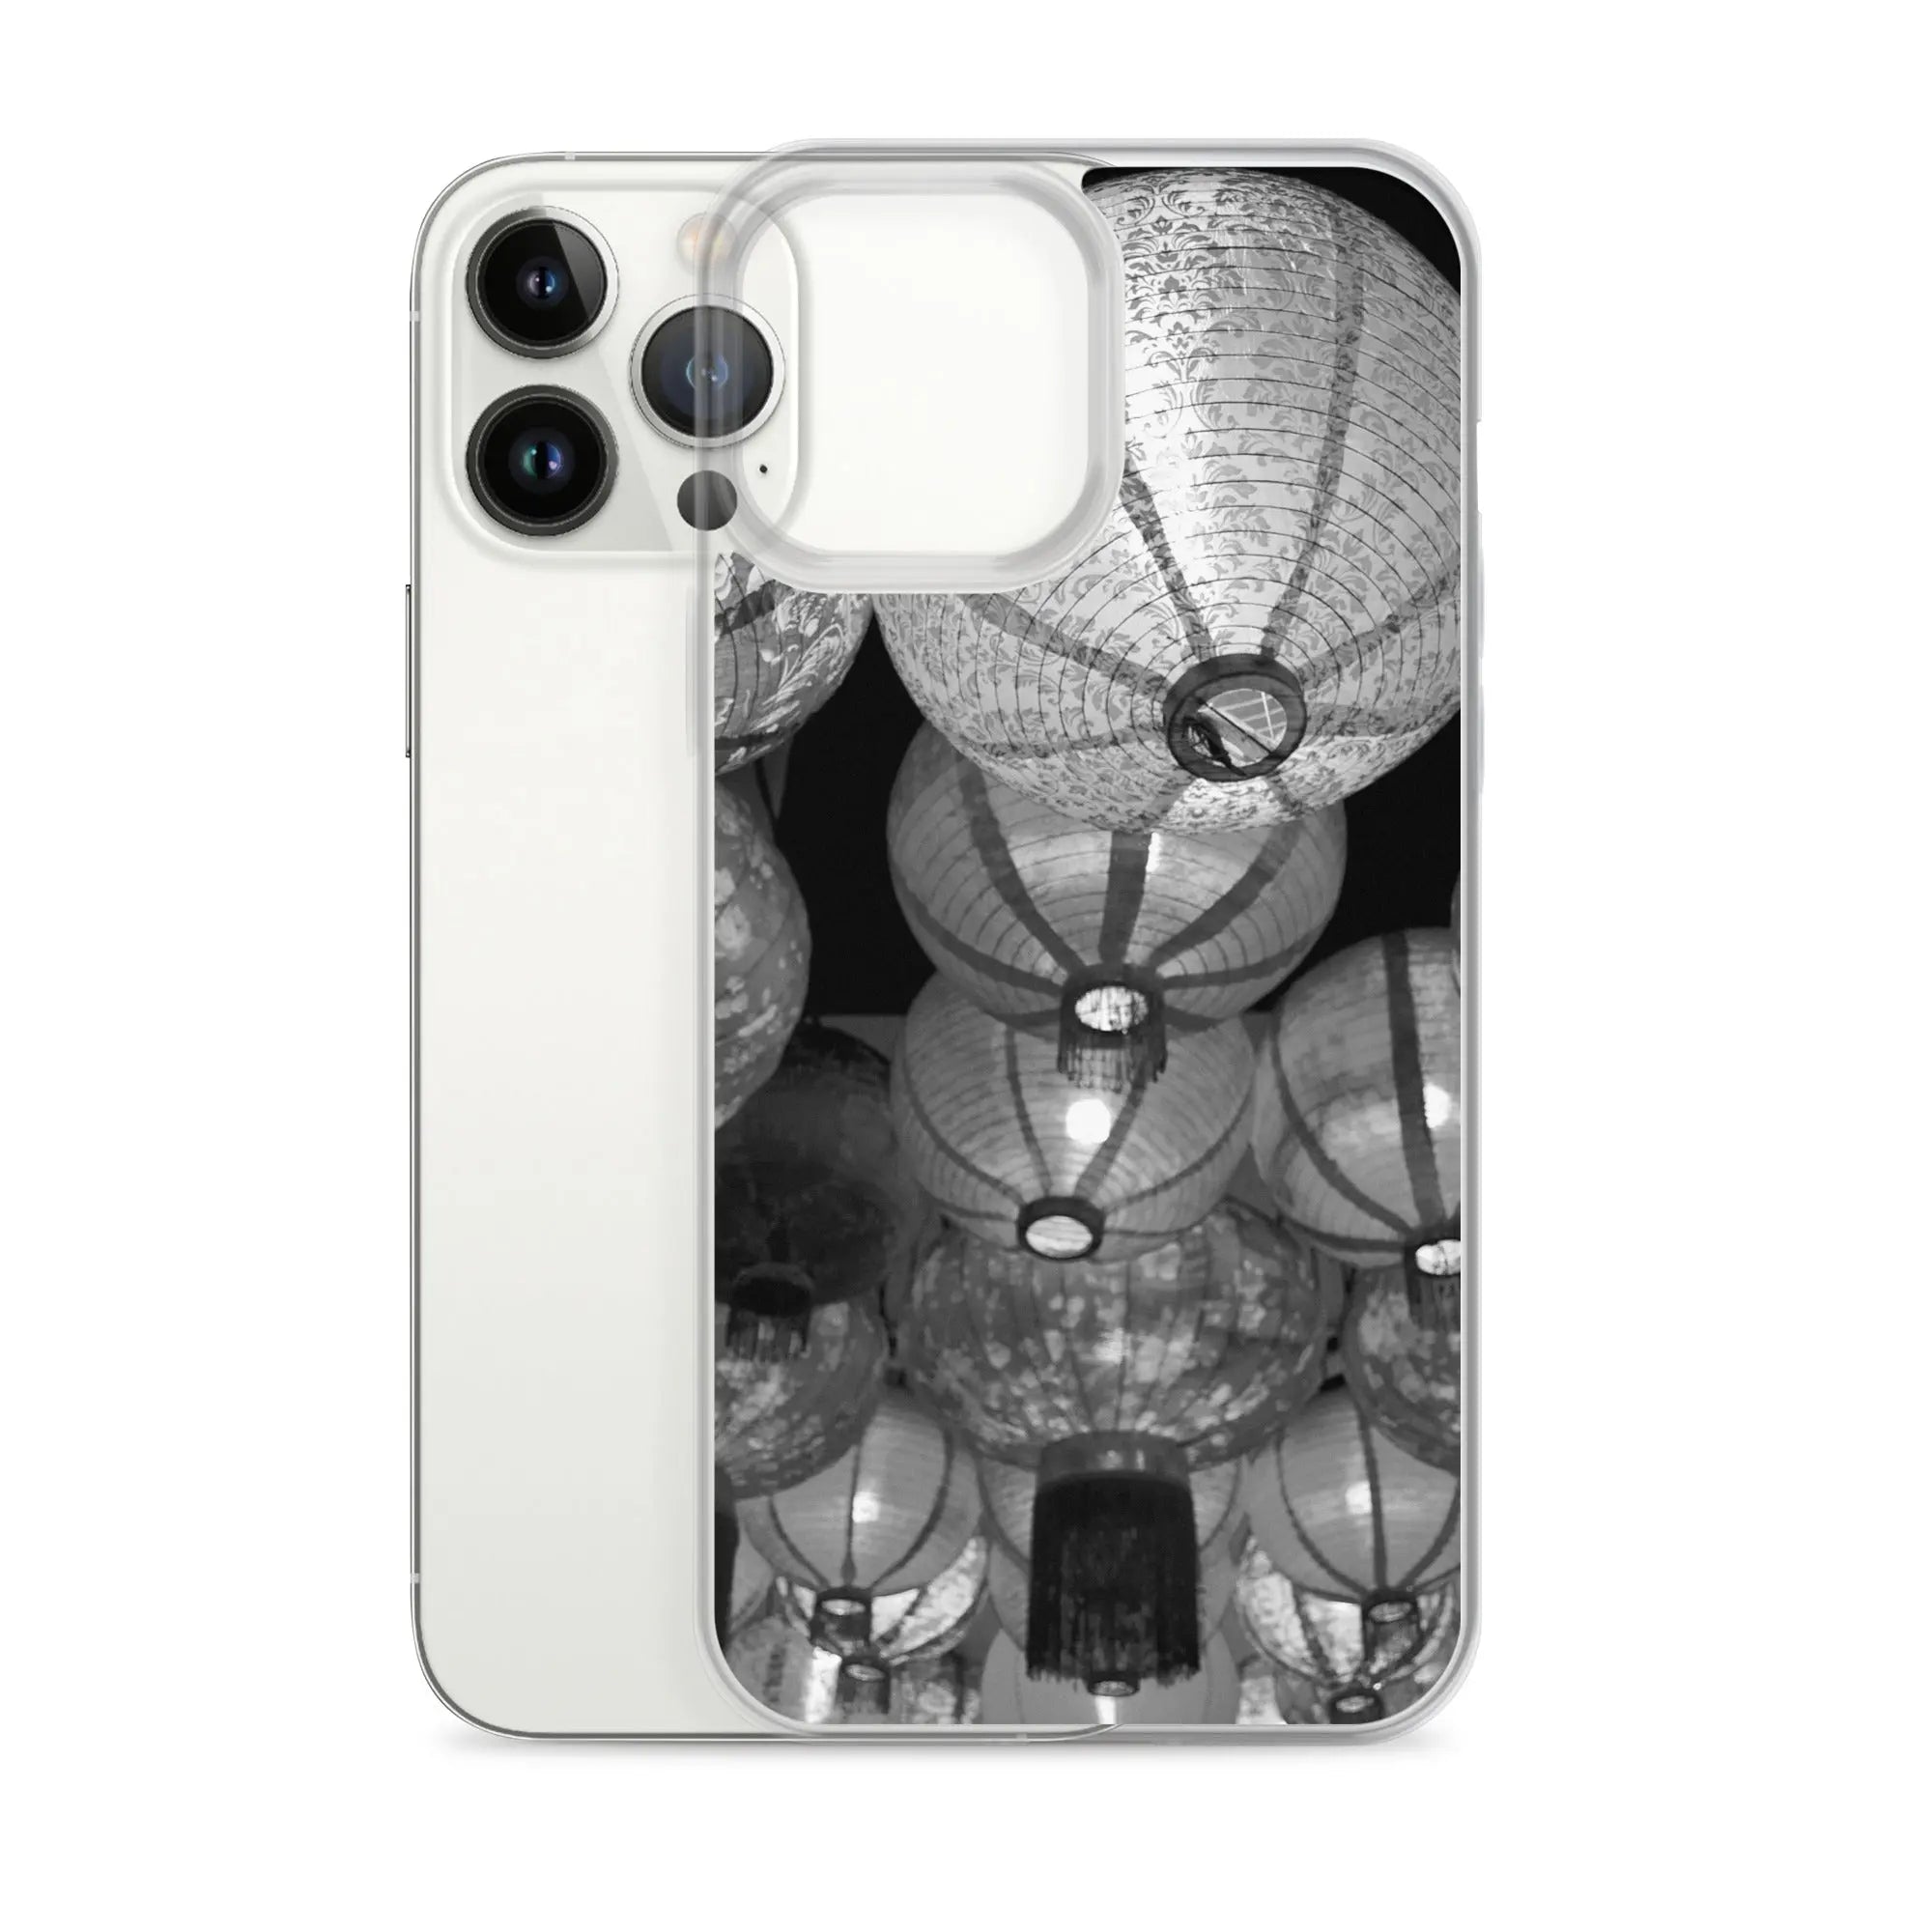 Raise The Red Lanterns - Designer Travels Art Iphone Case - Black And White - Iphone 13 Pro Max - Mobile Phone Cases